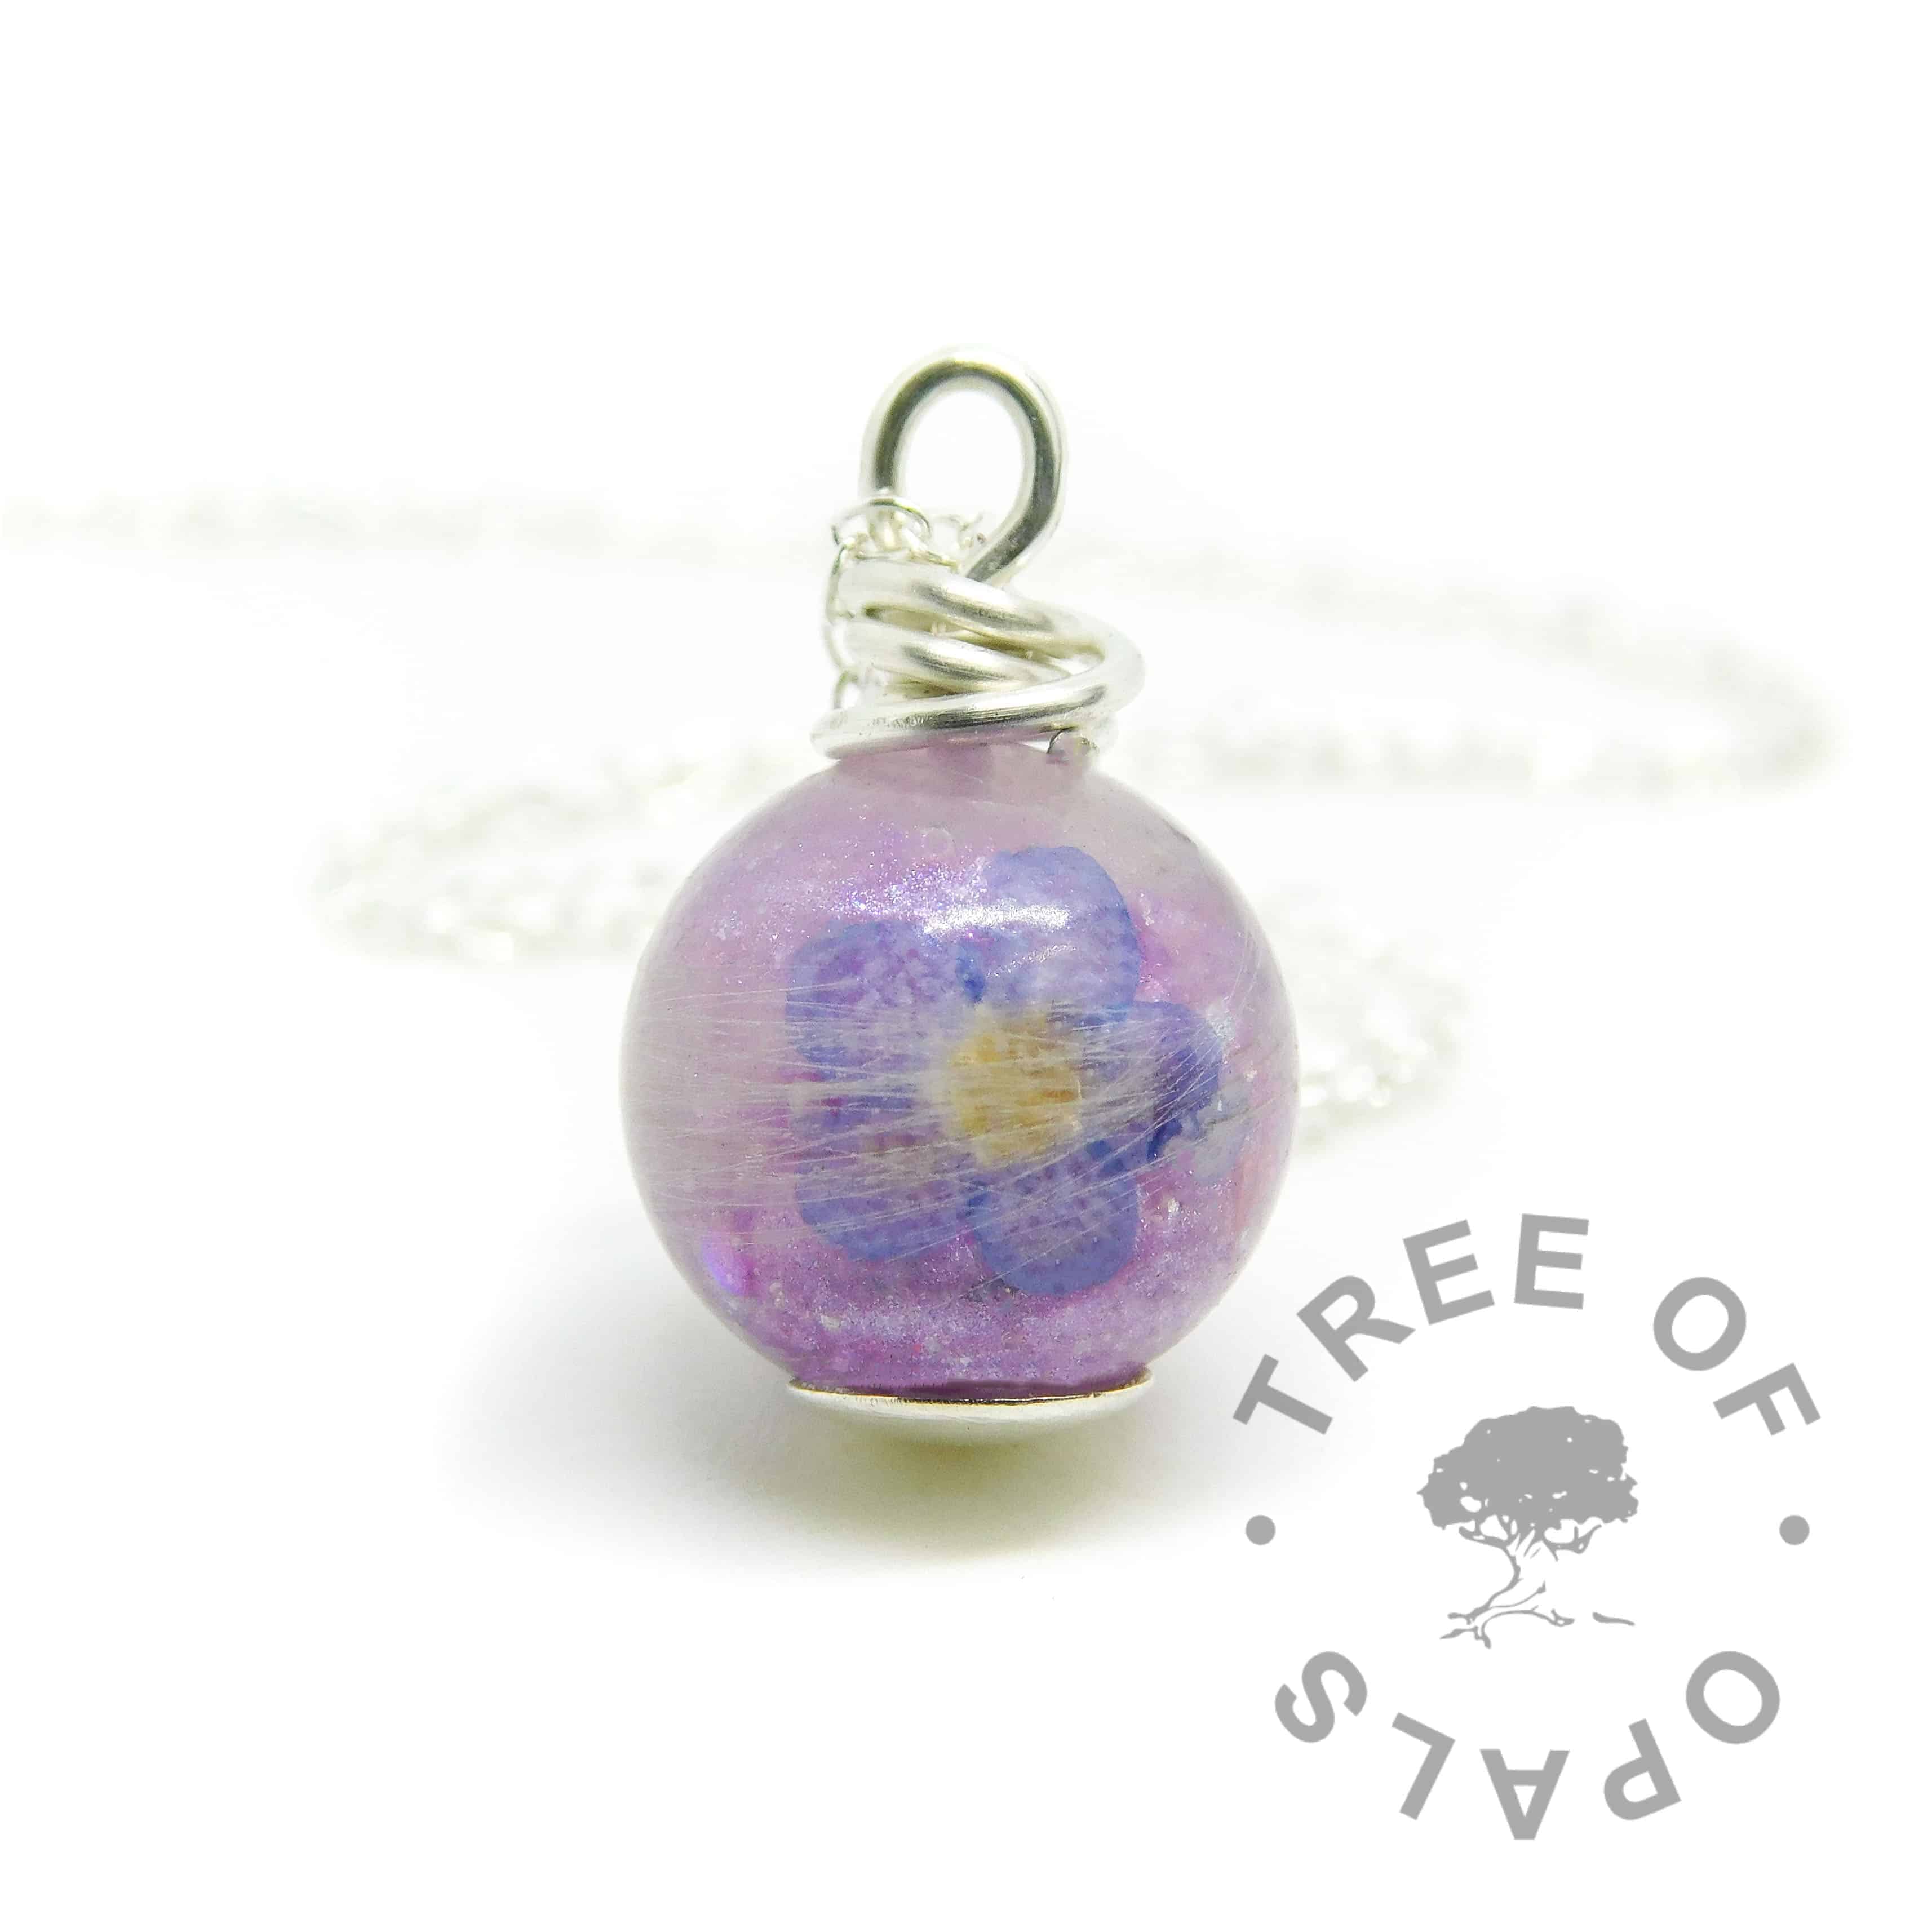 forget me not lock of hair pearl with naturally grey white hair, orchid purple resin sparkle mix in an 11mm sphere. Flat base, solid sterling silver wire wrapped by hand shown with matinee length lightweight chain